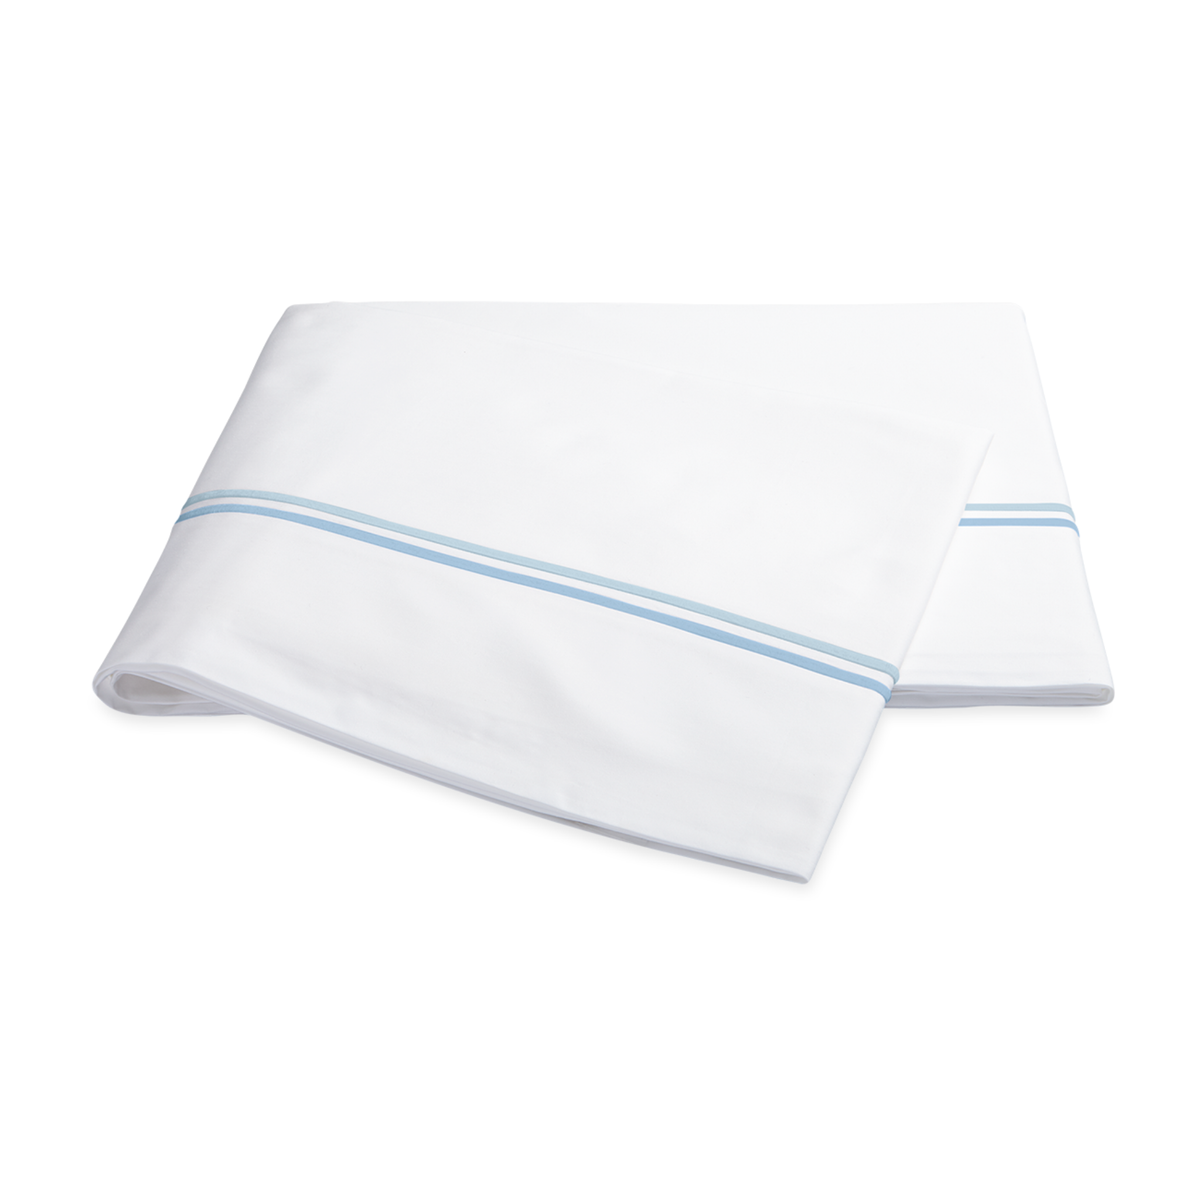 Flat Sheets in Light Blue Color Matouk Essex Bedding Collection